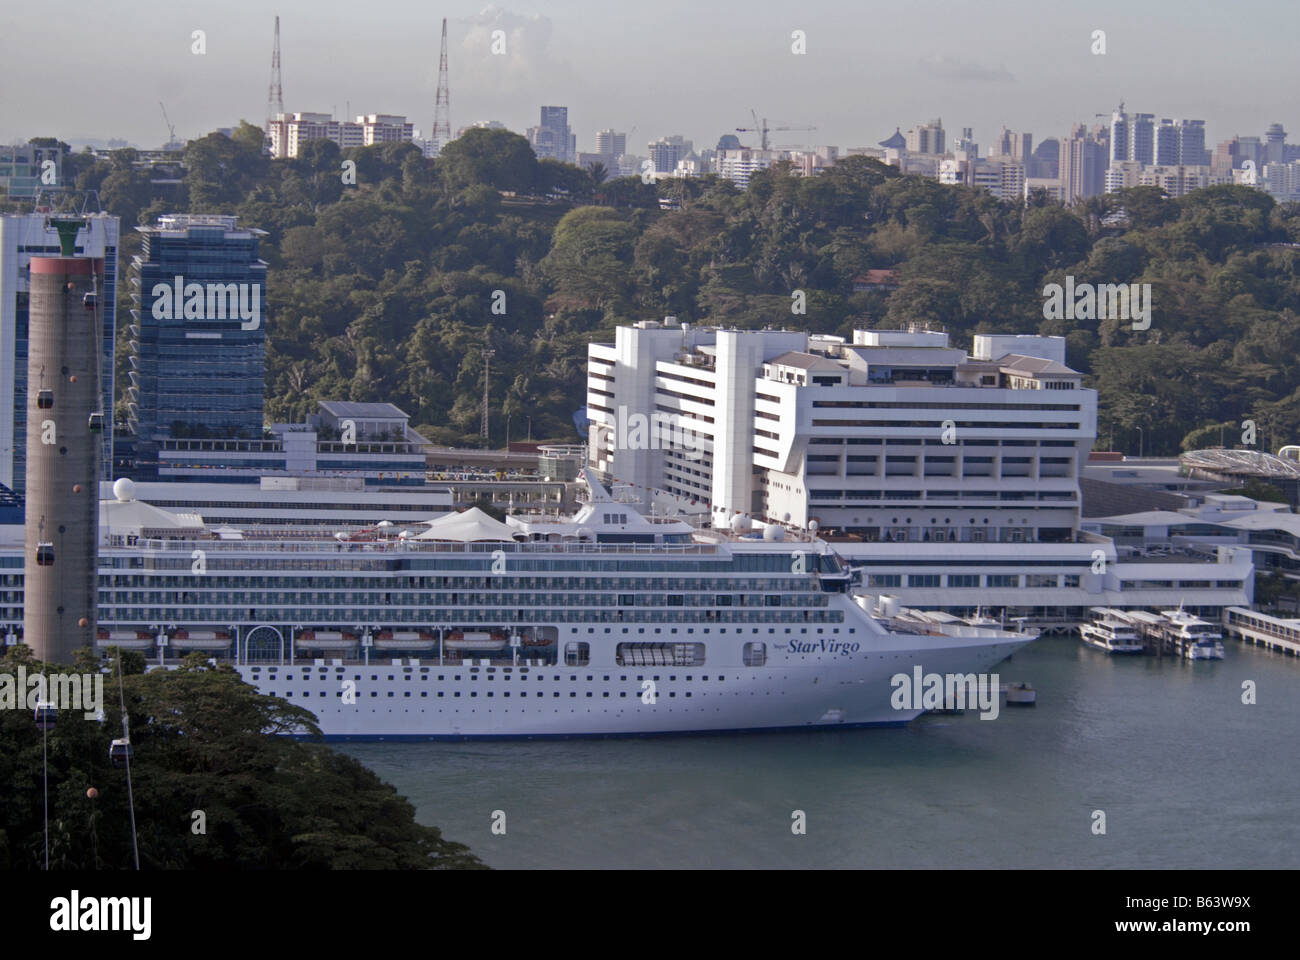 A LUXURY LINER IN SINGAPORE Stock Photo